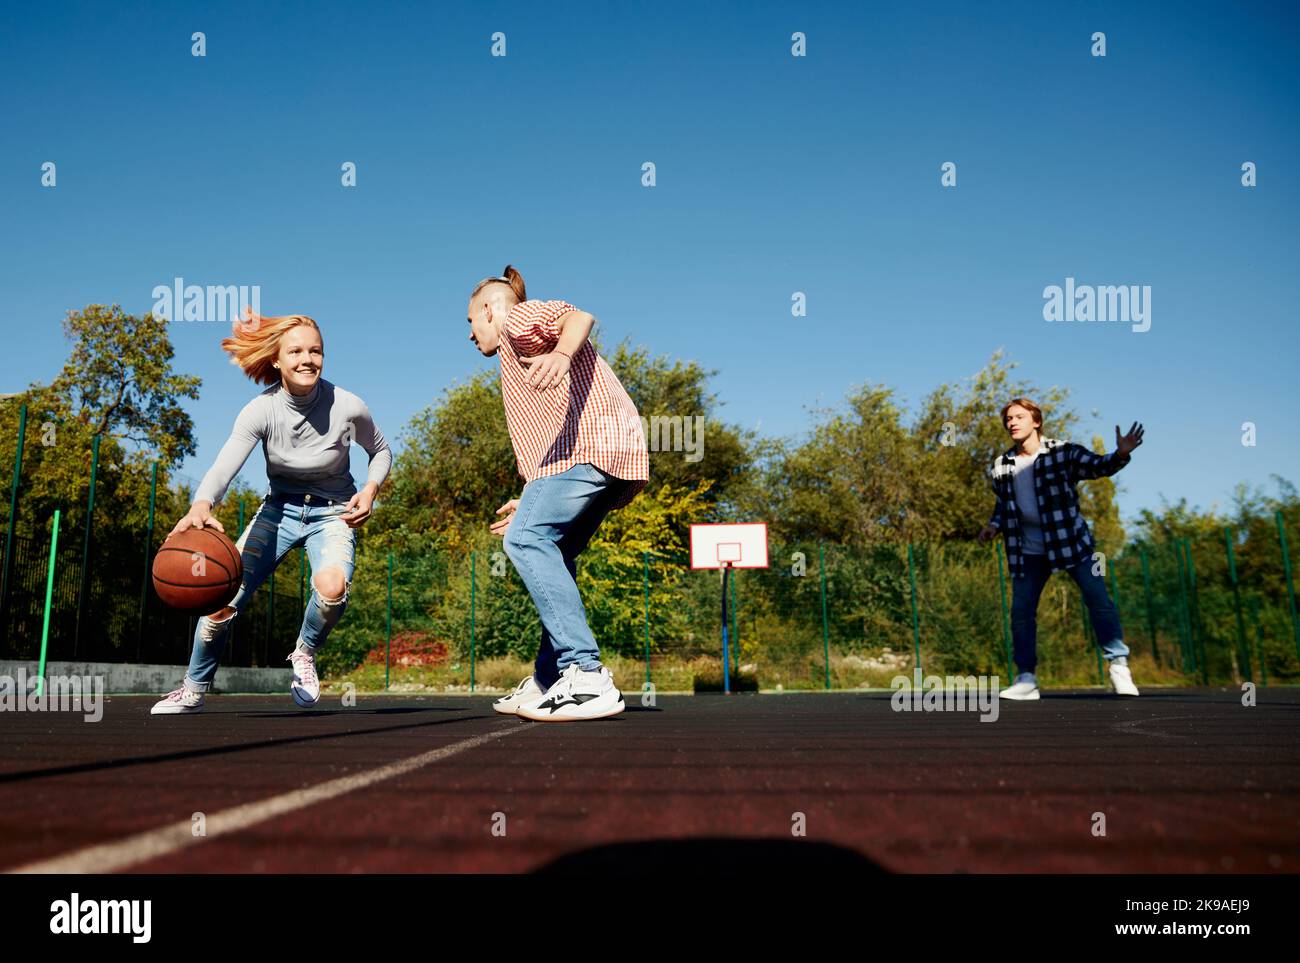 Three teenagers playing streetball with basketball ball at school yard after classes. Concept of sport, leisure activities, hobbies, team, friendship Stock Photo